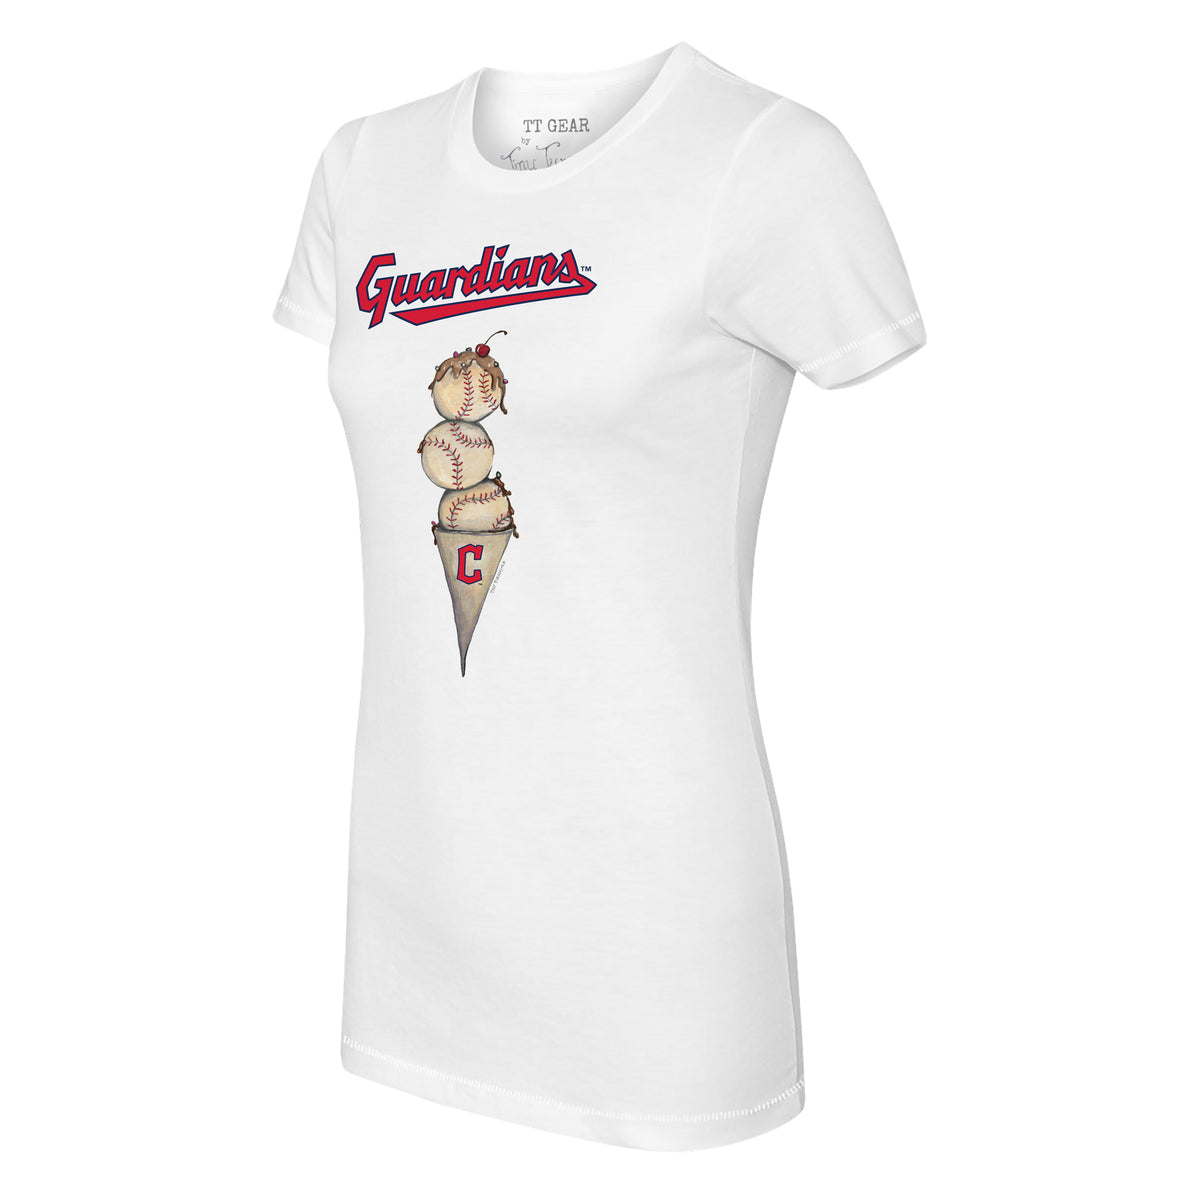 Youth Tiny Turnip White St. Louis Cardinals Kate The Catcher T-Shirt Size: Medium